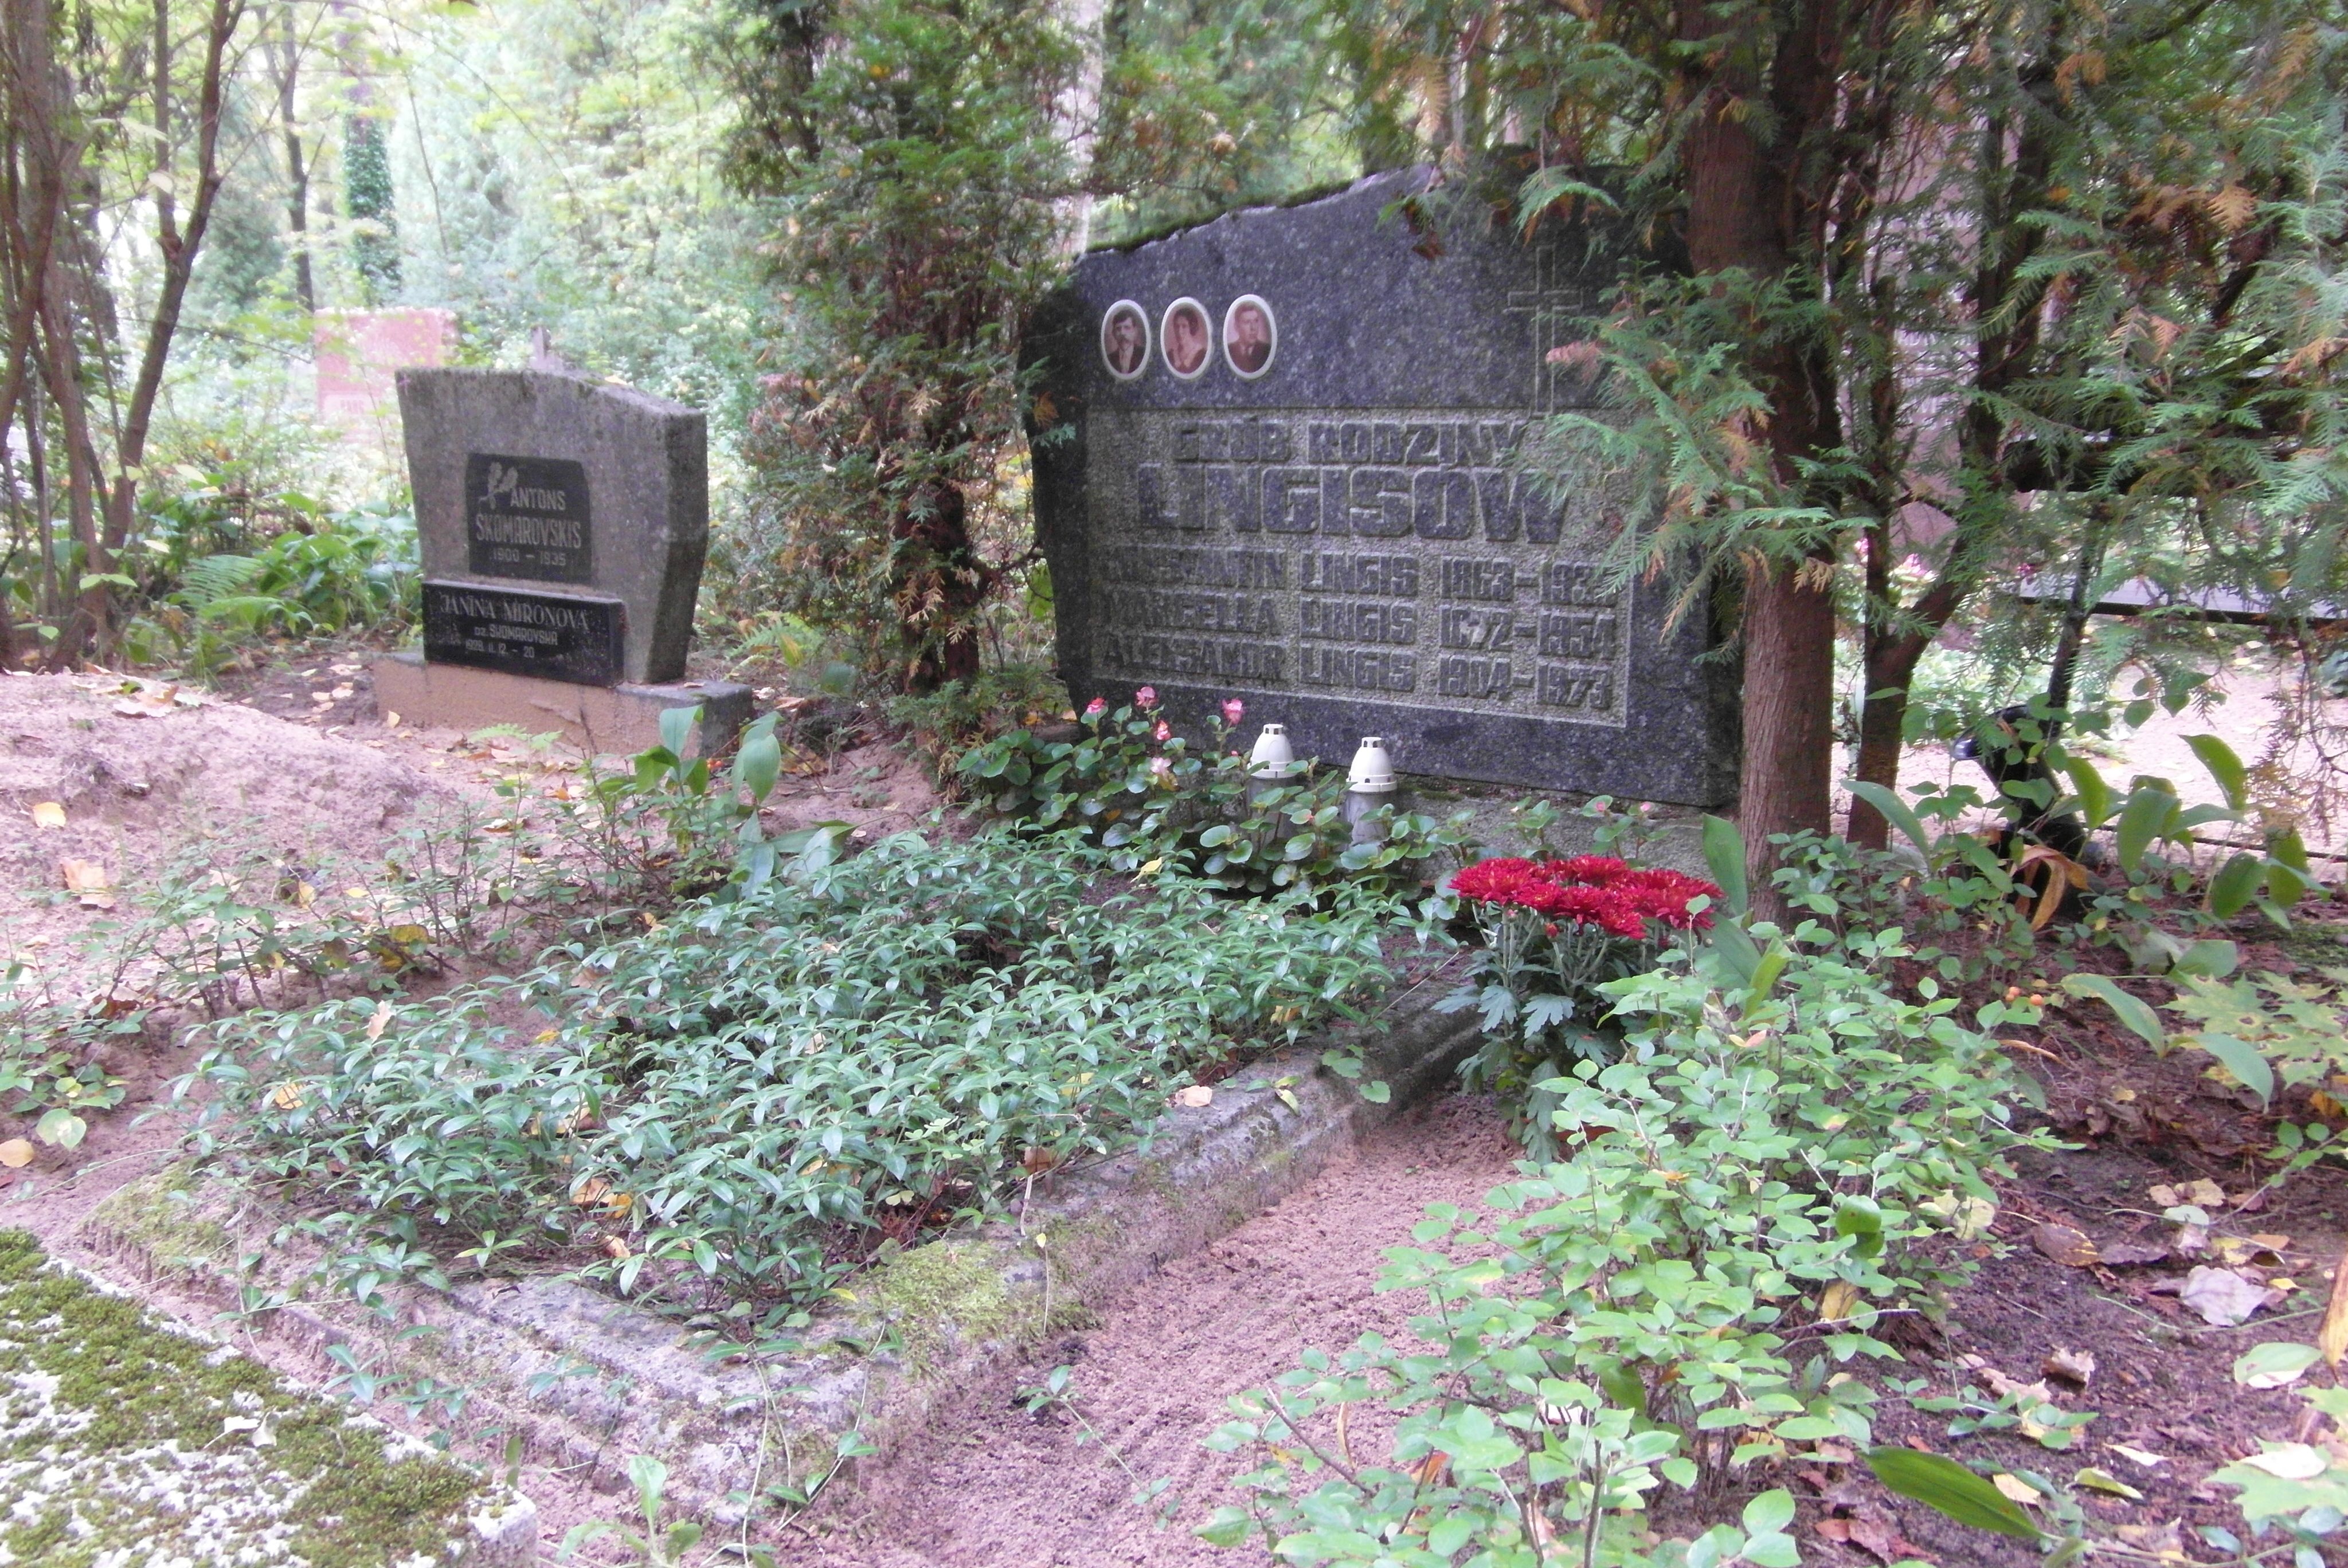 Grave of the Lingis family, St Michael's cemetery in Riga, as of 2021.